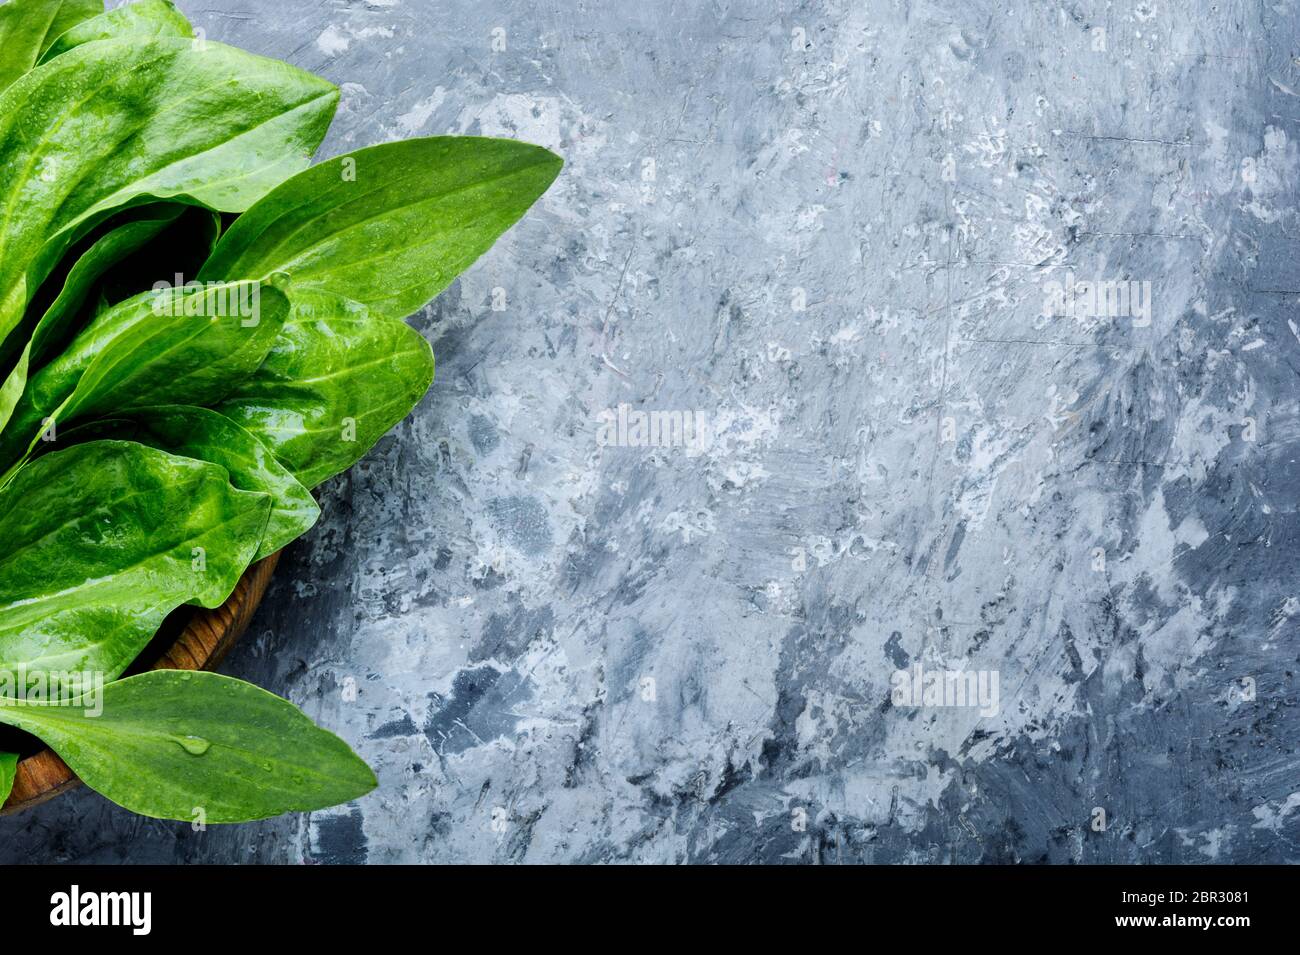 Leaf of greater plantain.Healing herbs.Copy space,space for text Stock Photo